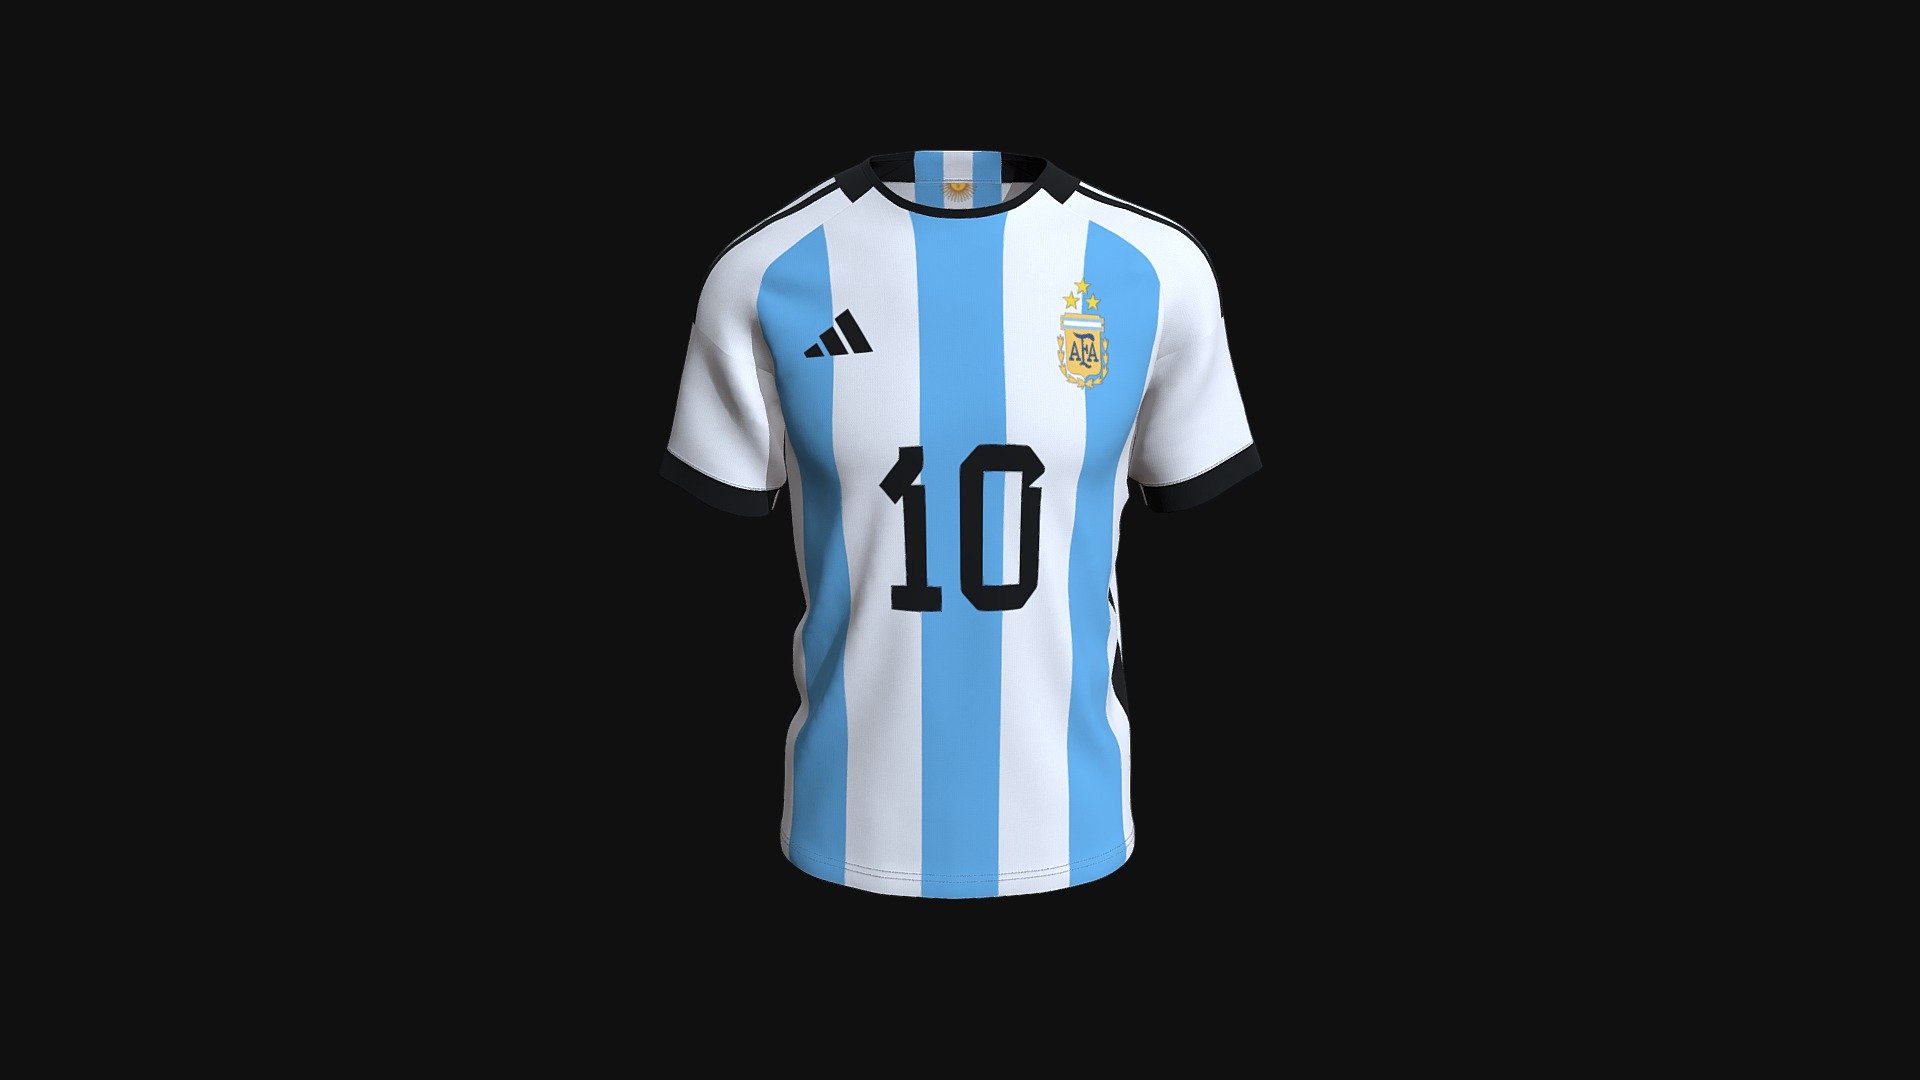 Cloth Title = Messi Jersey Design With 3 Star 

SKU = DG100268 

Category = Men 

Product Type = Jersey

Cloth Length = Regular 

Body Fit = Regular Fit 

Occasion = Casual  

Sleeve Style = Raglan Sleeve 


Our Services:

3D Apparel Design.

OBJ,FBX,GLTF Making with High/Low Poly.

Fabric Digitalization.

Mockup making.

3D Teck Pack

Pattern Making

2D Illustration

Cloth Animation and 360 Spin Video


Contact us:- 

Email: info@digitalfashionwear.com 

Website: https://digitalfashionwear.com 


We designed all the types of cloth specially focused on product visualization, e-commerce, fitting, and production. 

We will design: 

T-shirts 

Polo shirts 

Hoodies 

Sweatshirt 

Jackets 

Shirts 

TankTops 

Trousers 

Bras 

Underwear 

Blazer 

Aprons 

Leggings 

and All Fashion items. 





Our goal is to make sure what we provide you, meets your demand 3d model